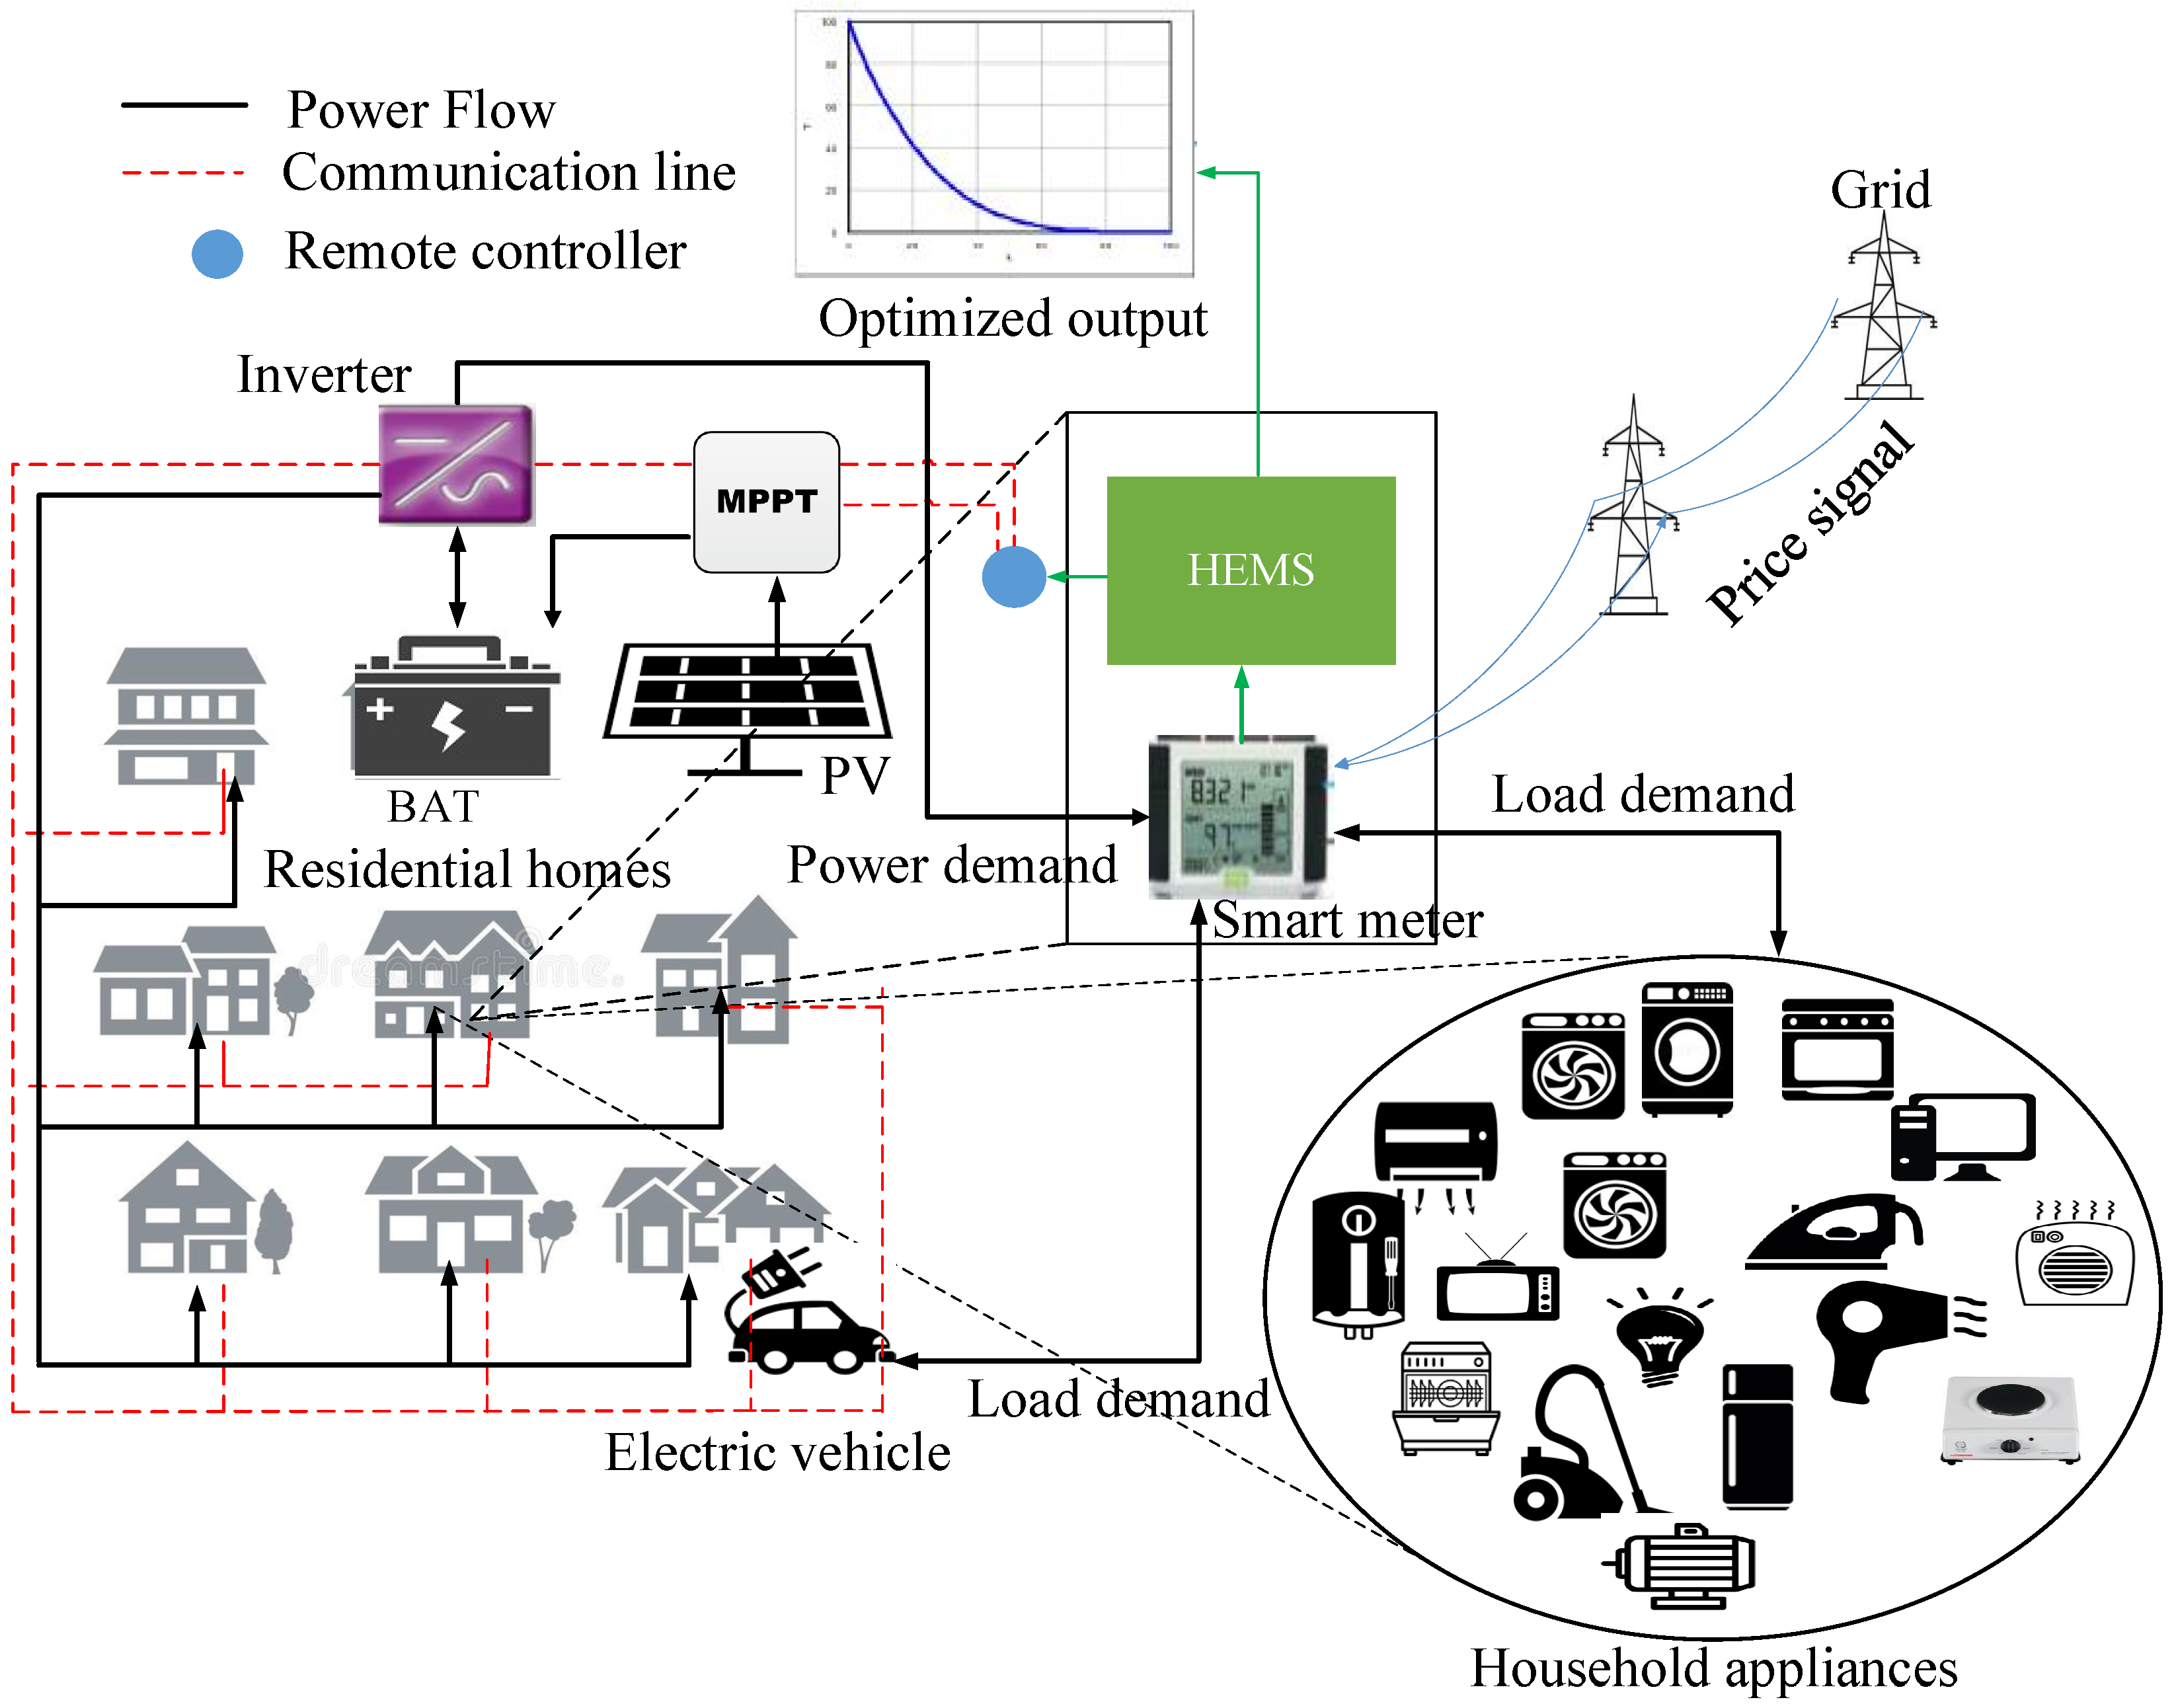 Energies Free Full Text An Efficient Power Scheduling In Smart Homes Using Jaya Based Optimization With Time Of Use And Critical Peak Pricing Schemes Html